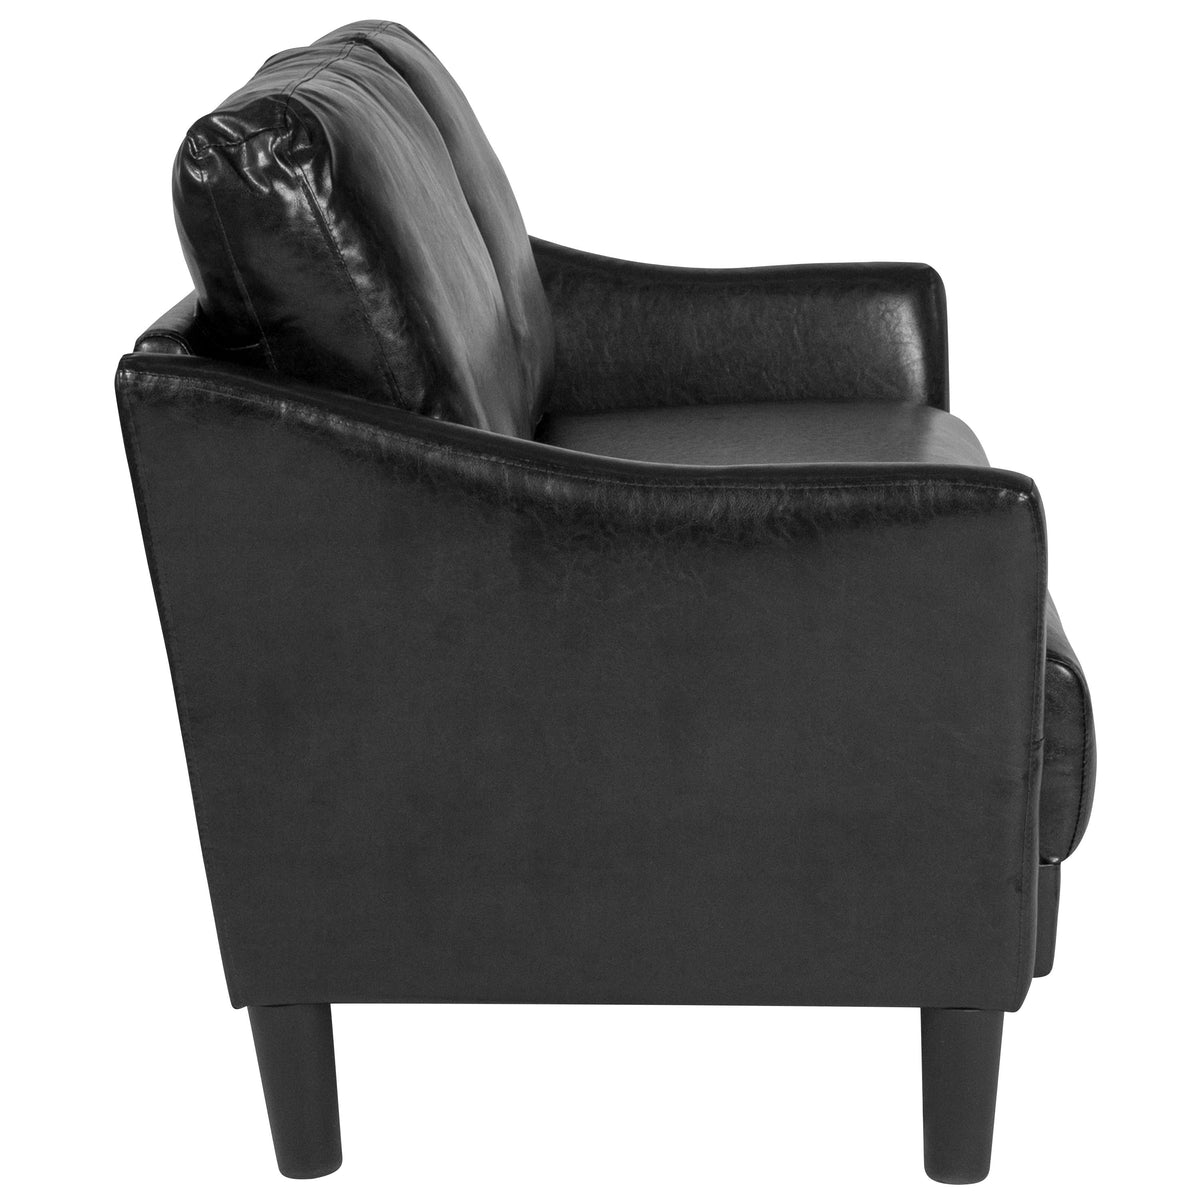 Black LeatherSoft |#| Upholstered Living Room Loveseat with Single Cushion Seat in Black LeatherSoft